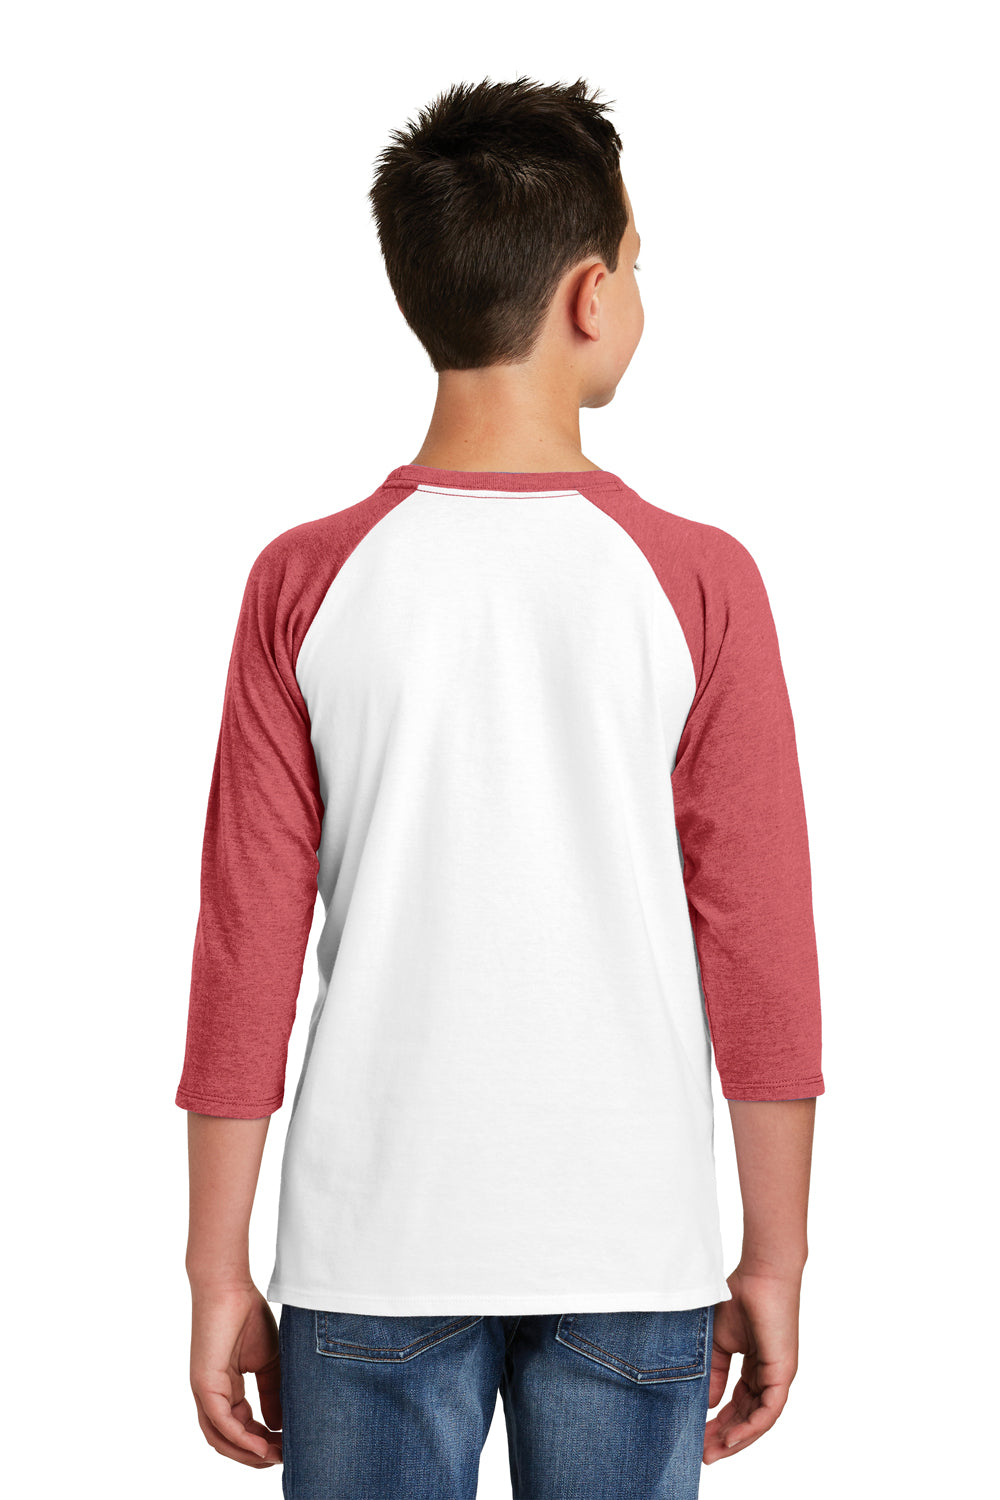 District DT6210Y Youth Very Important 3/4 Sleeve Crewneck T-Shirt White/Heather Red Back